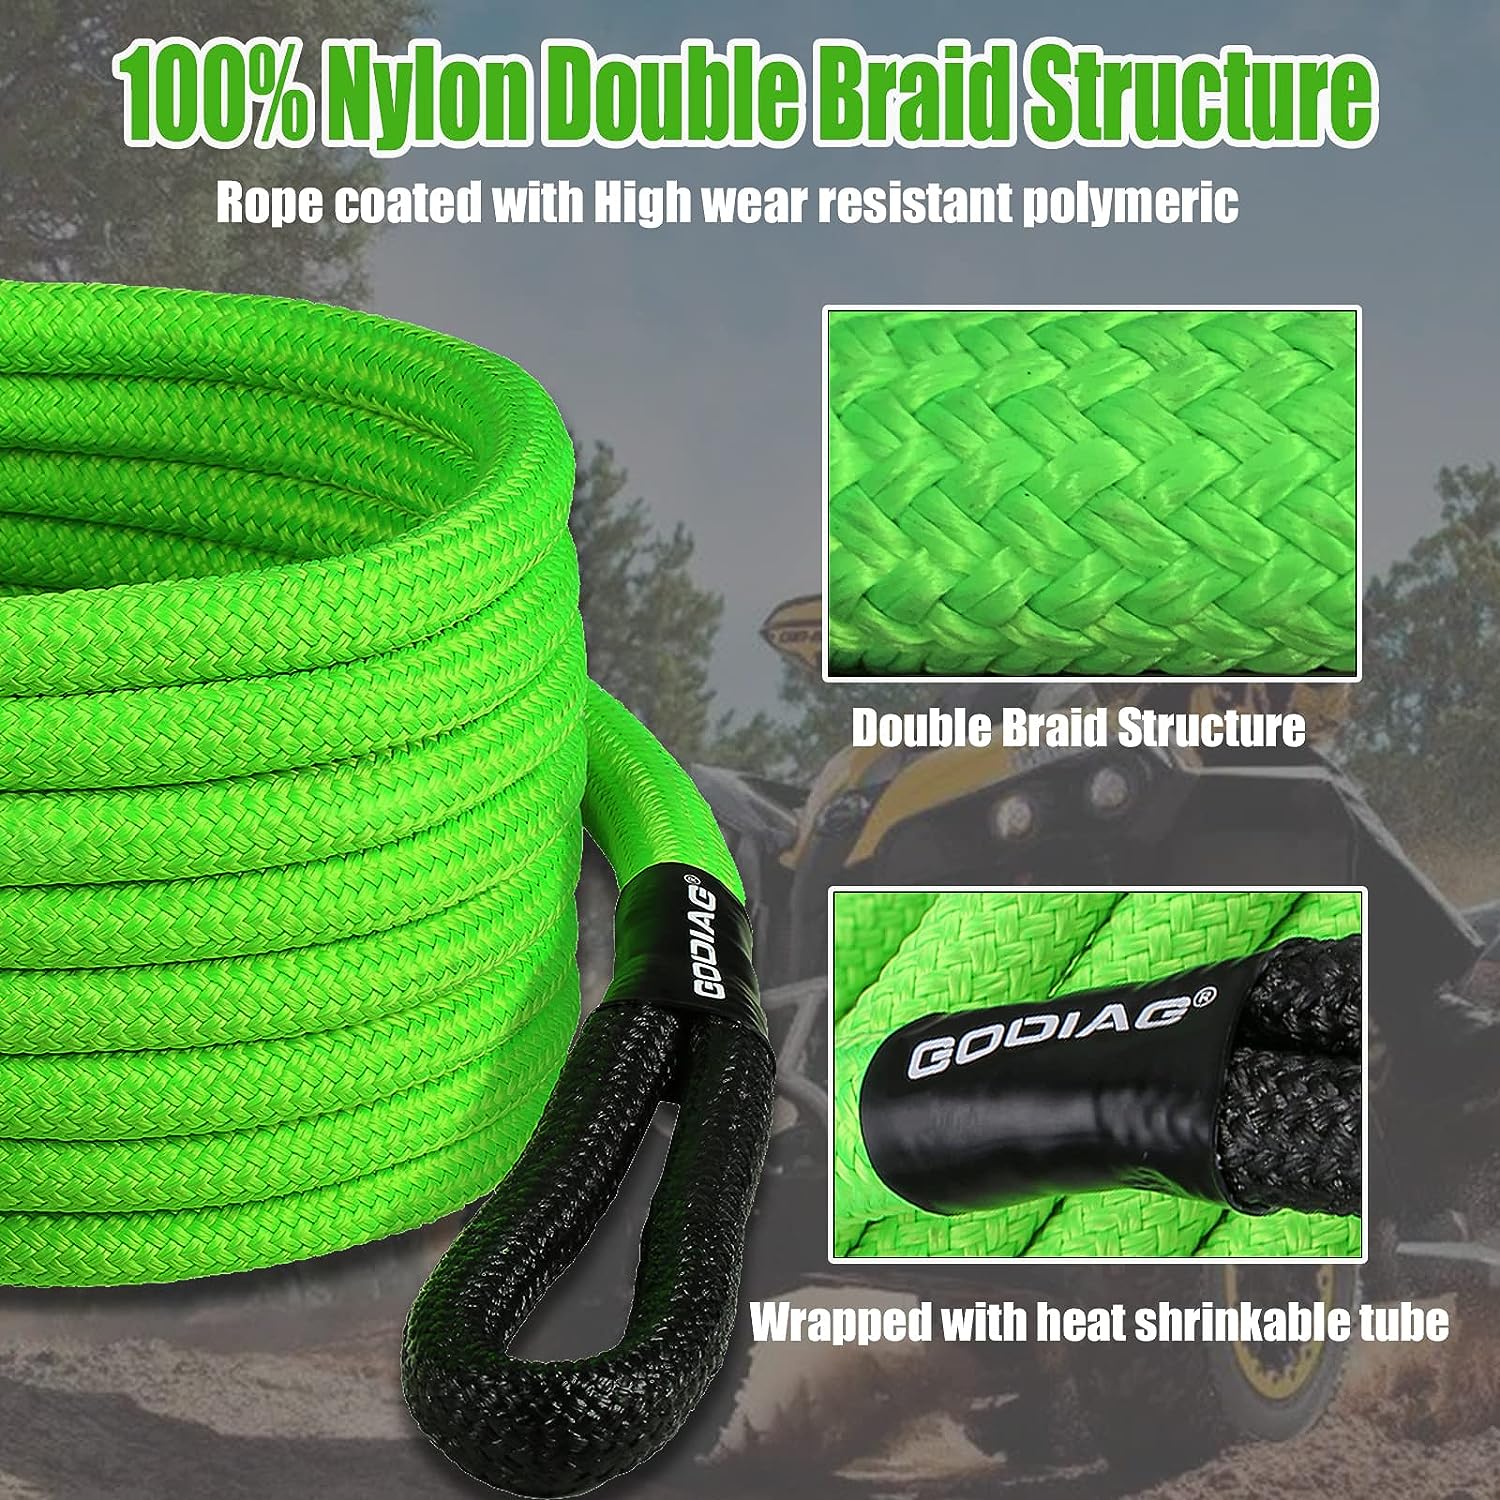 GODIAG Tow Rope 9 m x 2.5 cm, High Strength Tow Rope Car Breakdown